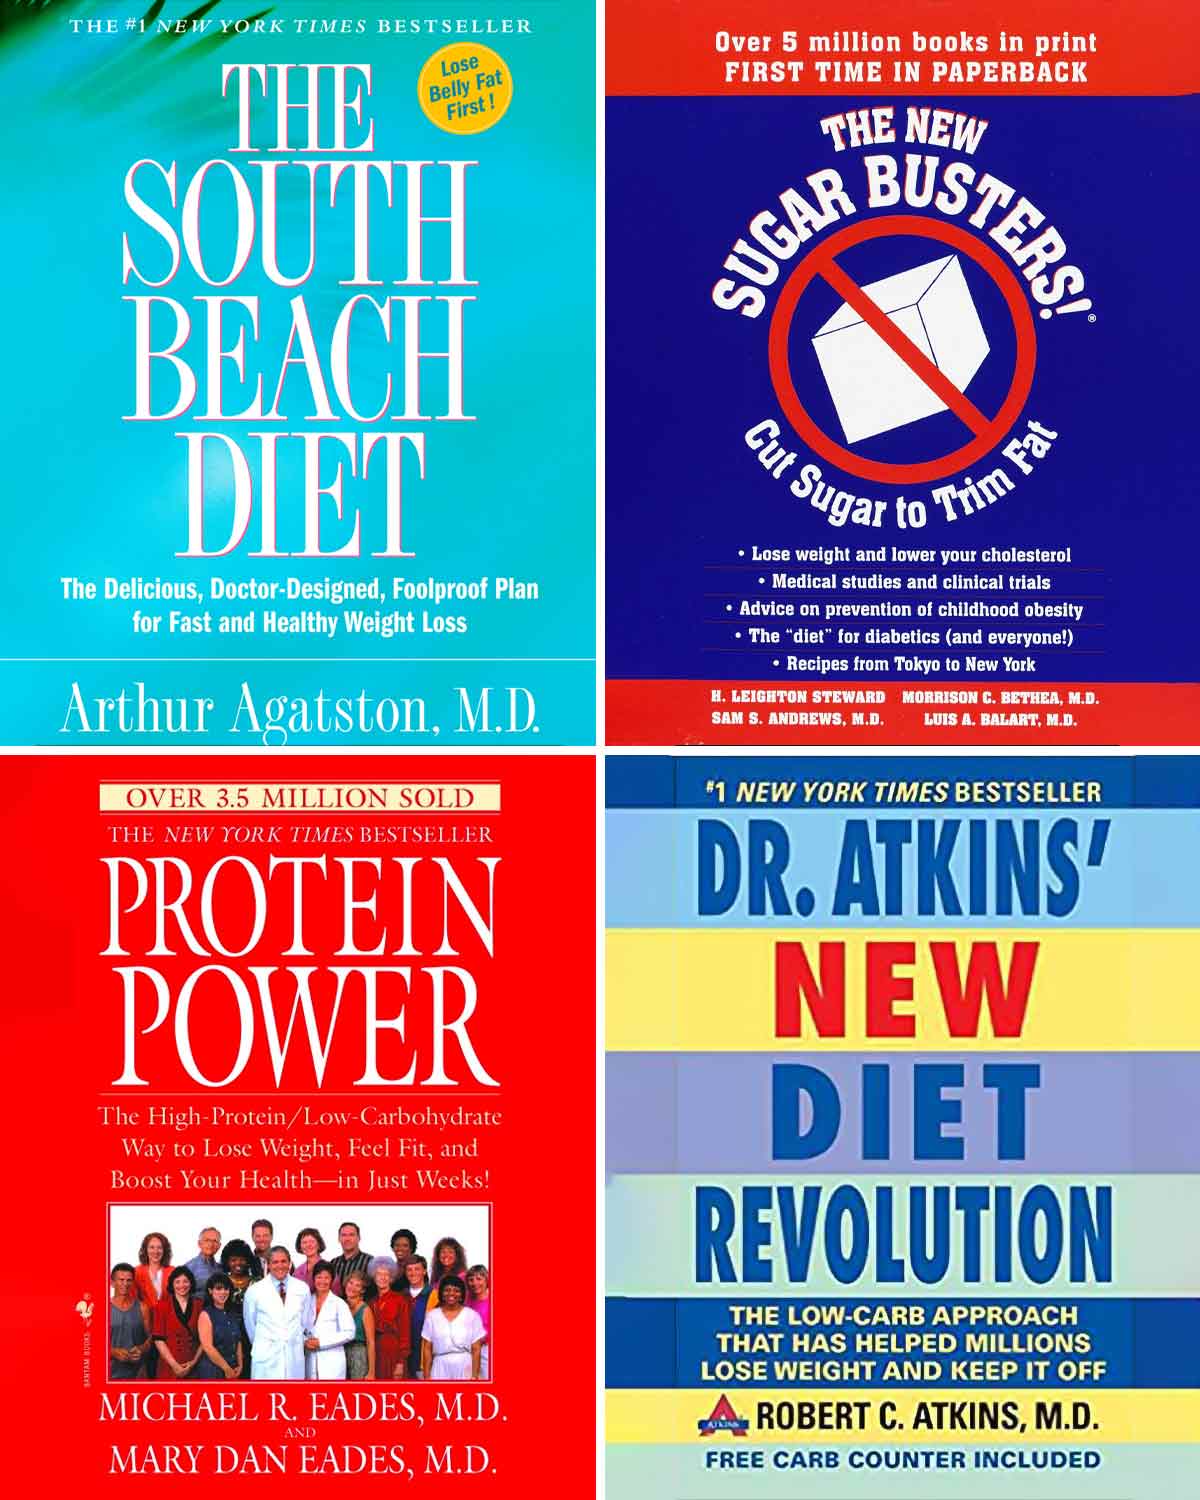 Four book covers -- The South Beach Diet, The New Sugar Busters!, Protein Power, and Dr. Atkins' New Diet Revolution -- for the Gary Taubes interview.